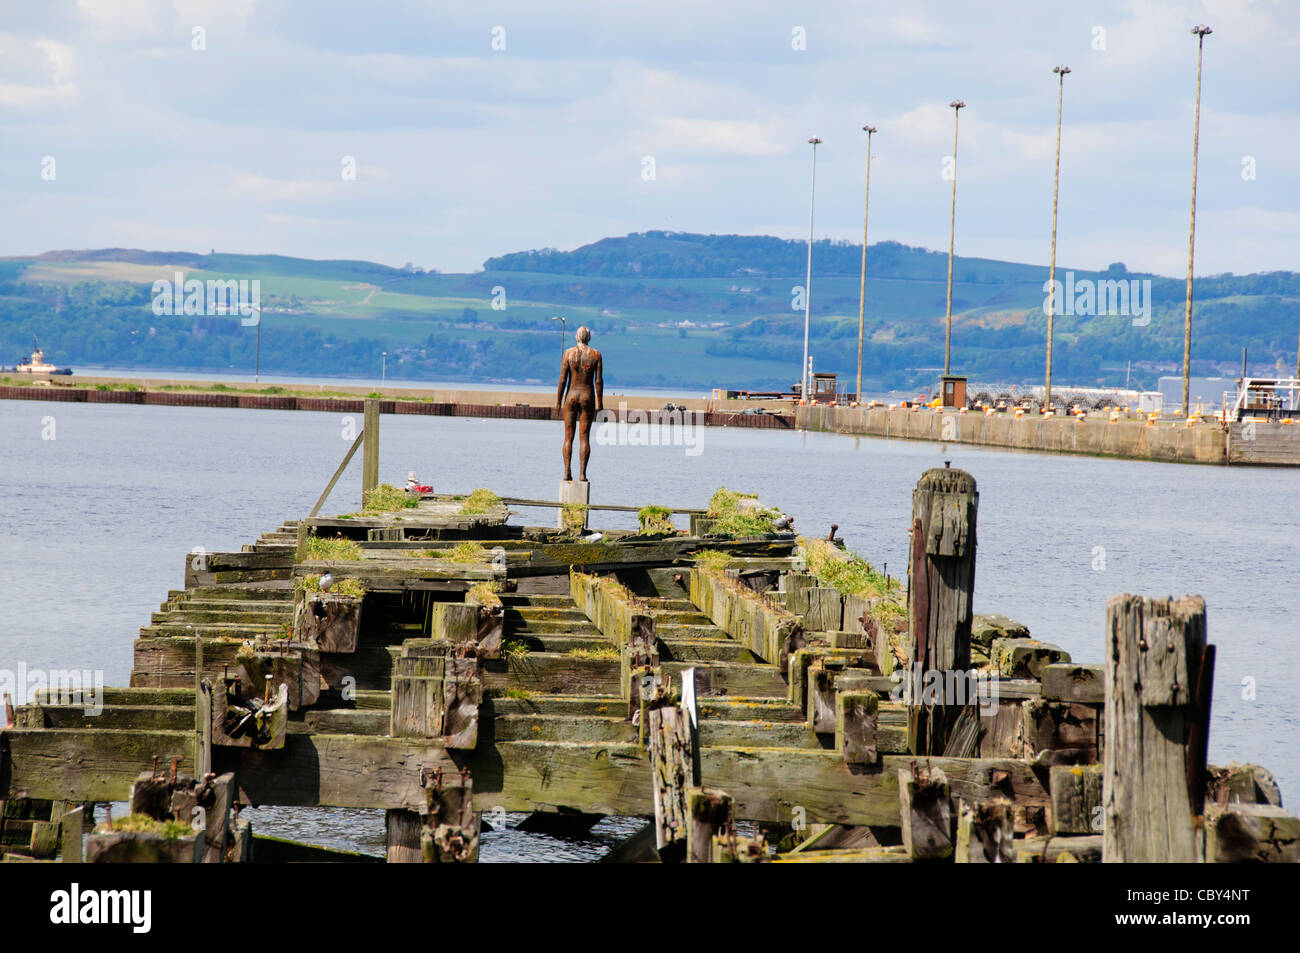 Leith harbour,Home To North Sea oil Vessels,Rigs,Manufacturing,Bonded Warehouses,Container Shipping,Edinburgh,Leith,Scotland Stock Photo